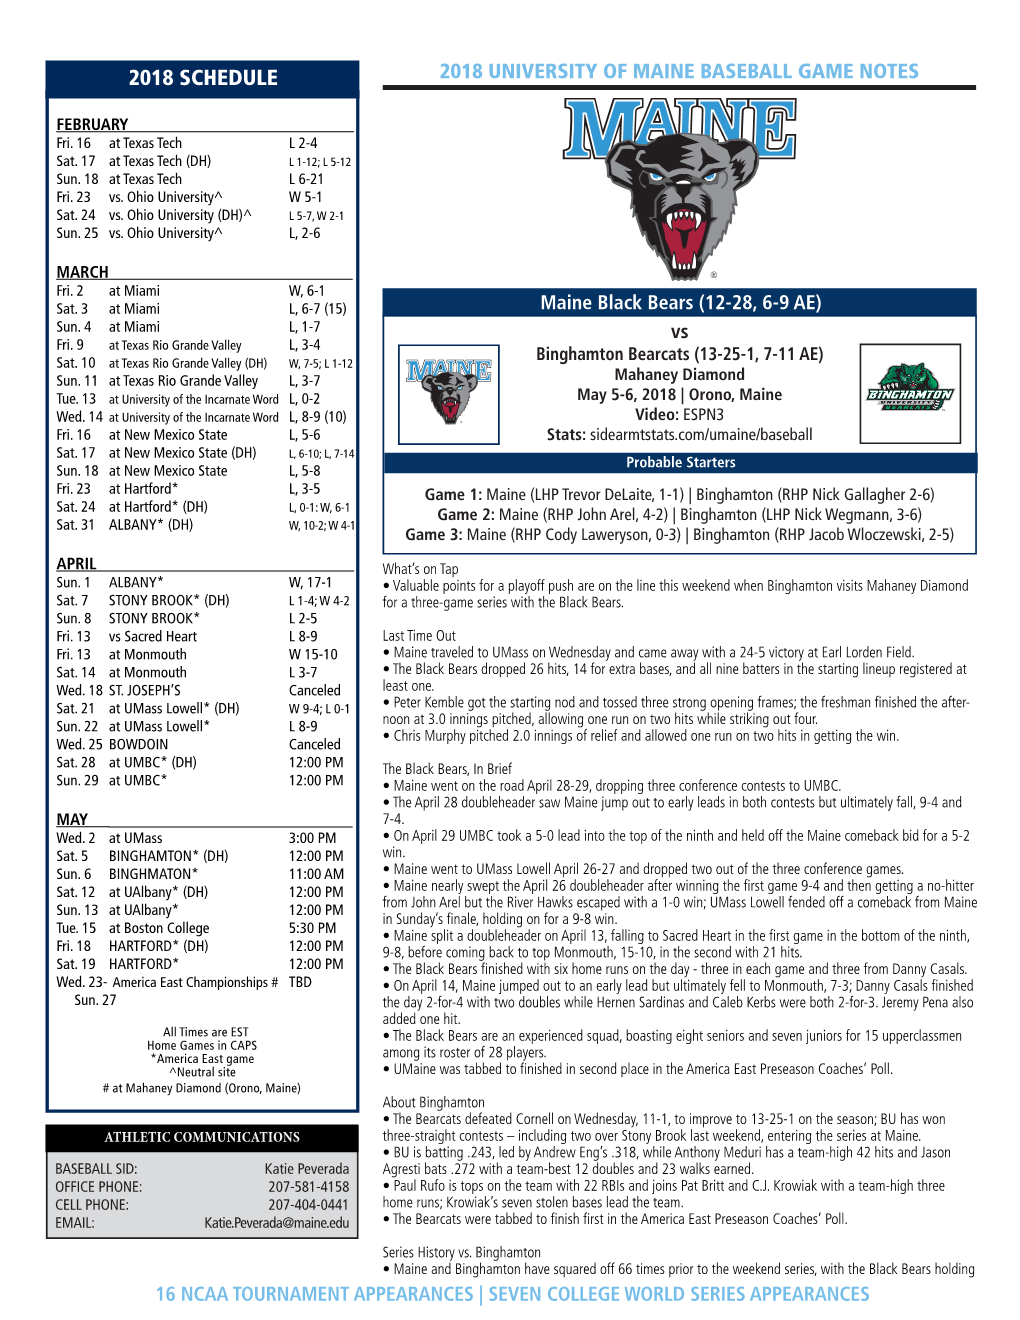 2018 Schedule 2018 University of Maine Baseball Game Notes